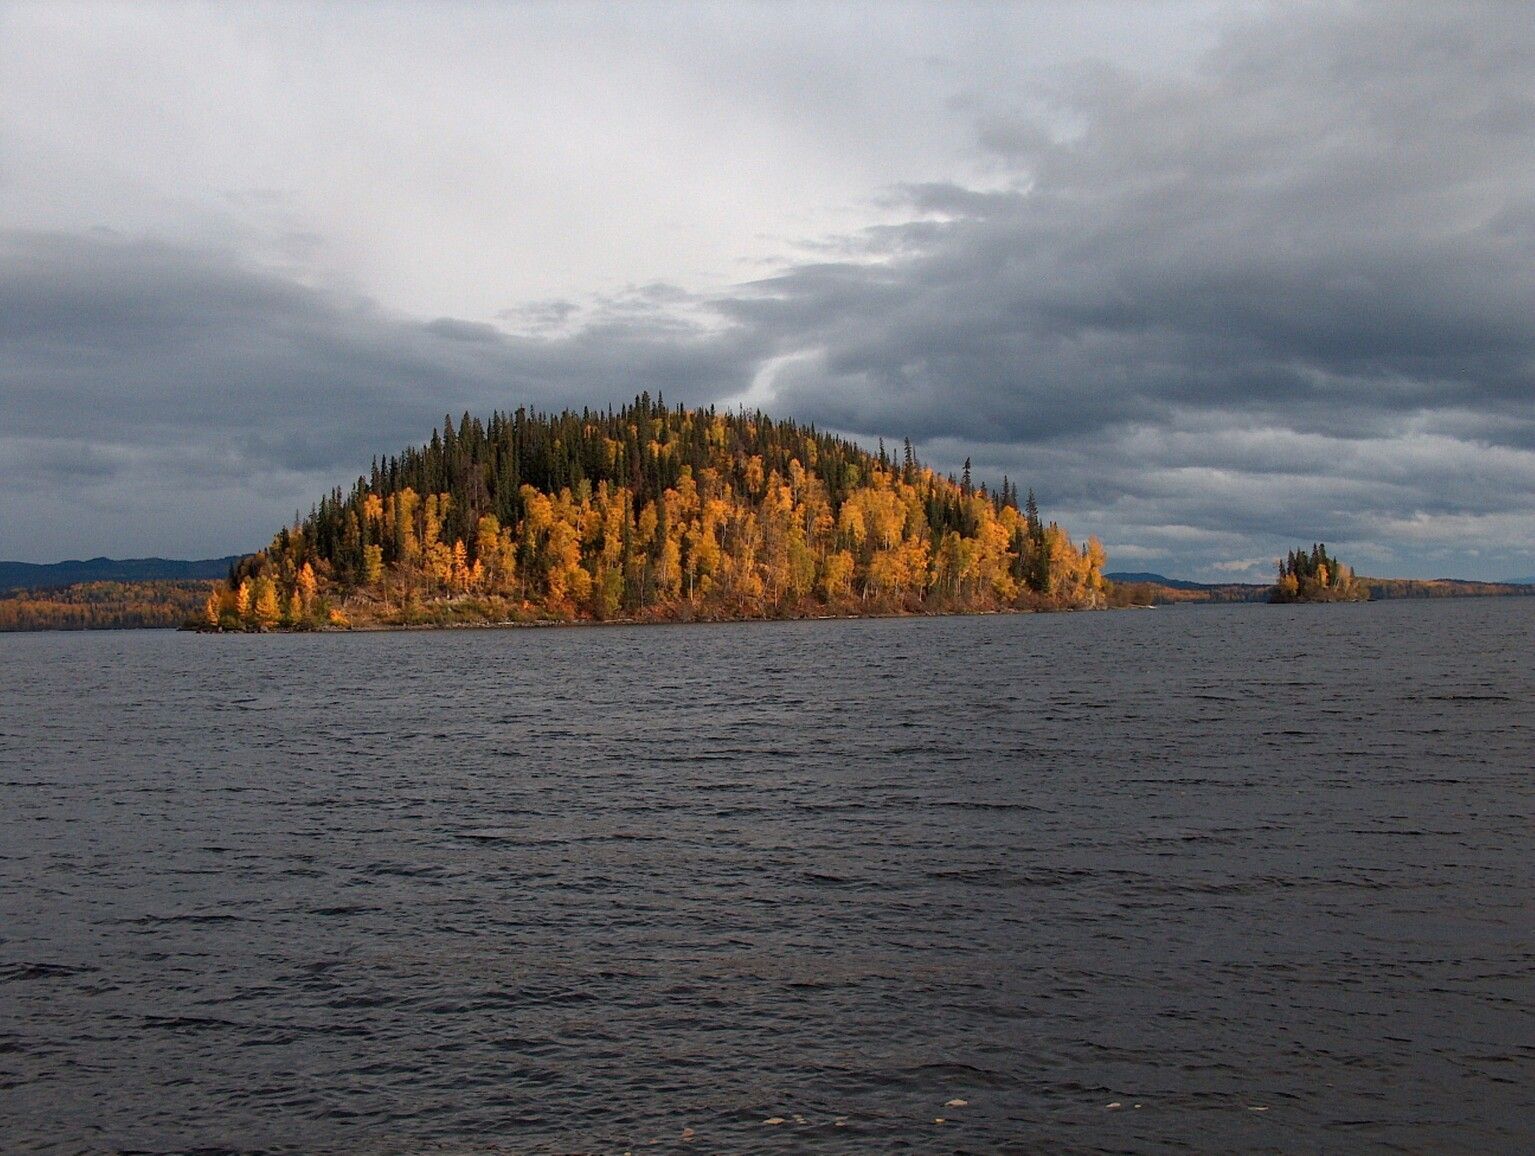 A fall day looking at Bear Island, part of Bear Island Conservancy.